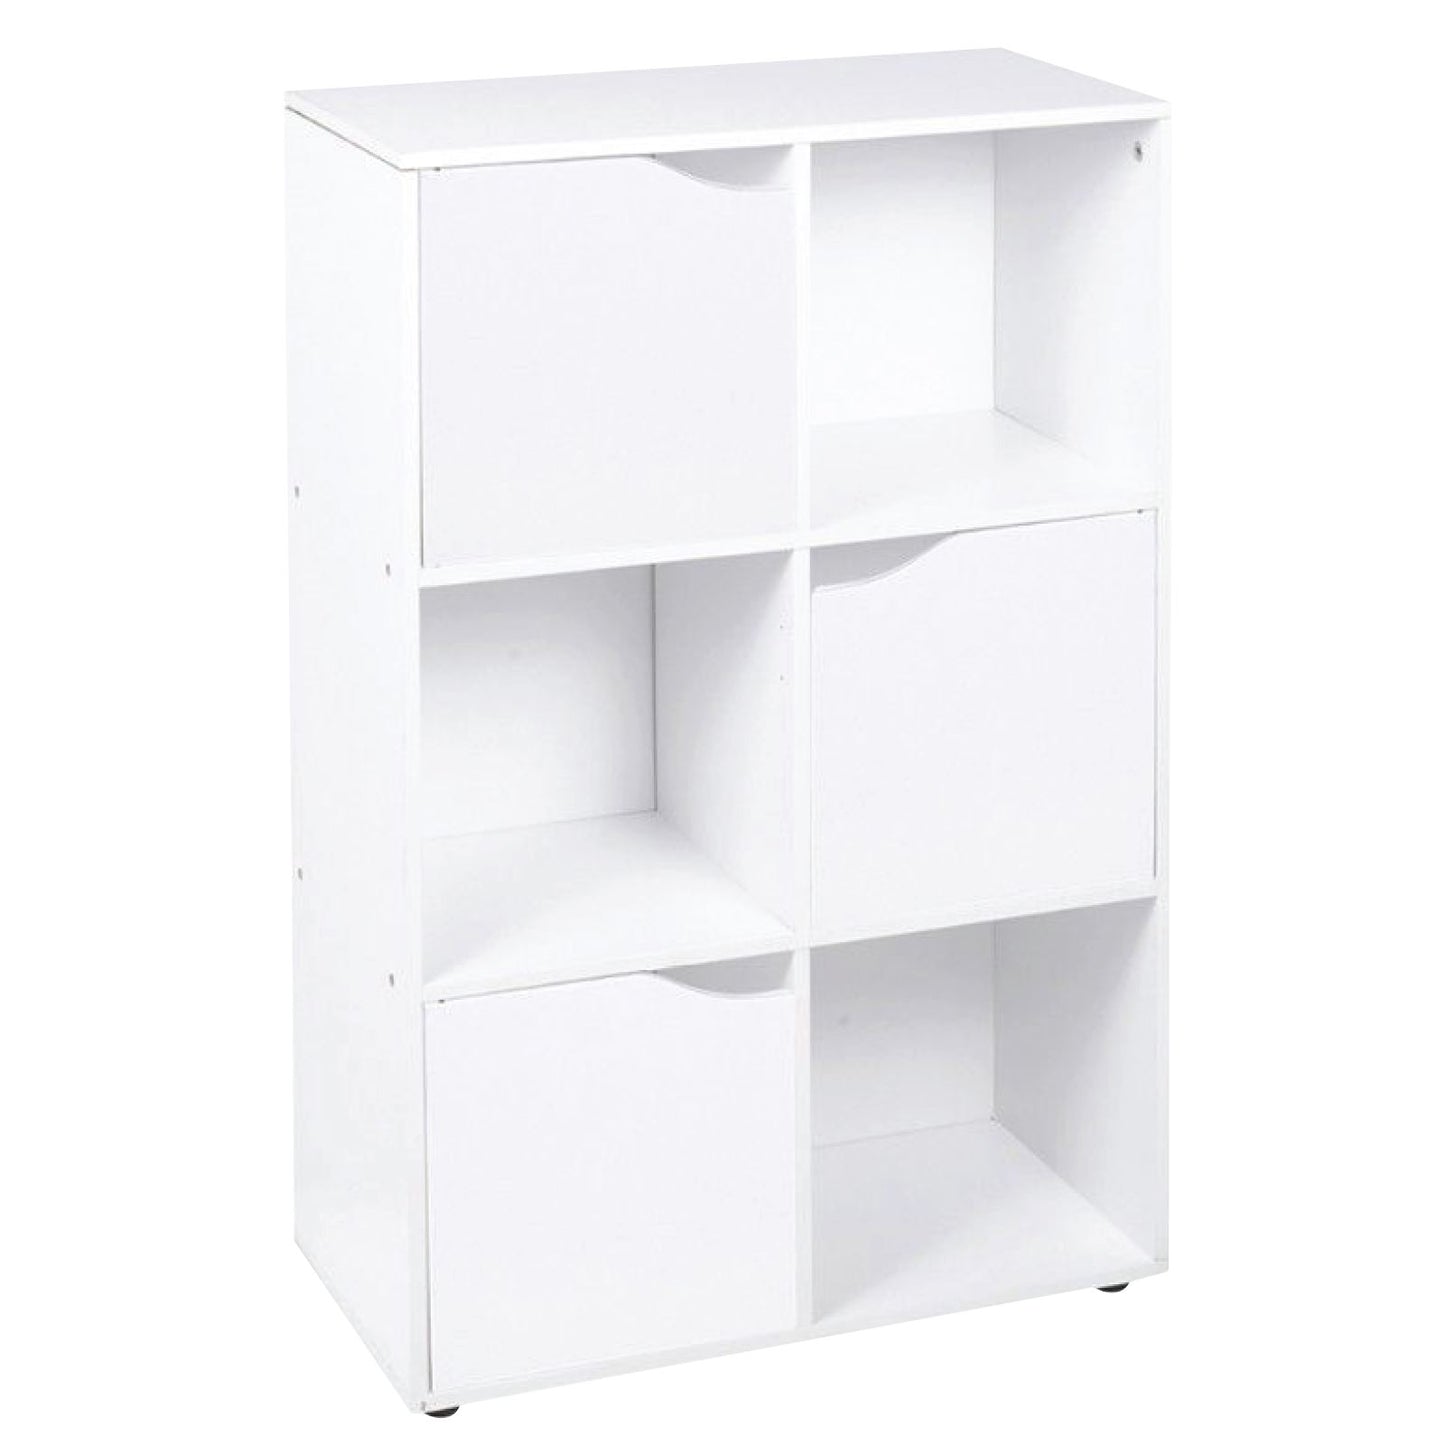 Store your belongings in style with the 6 Cube 3 Door Storage Unit